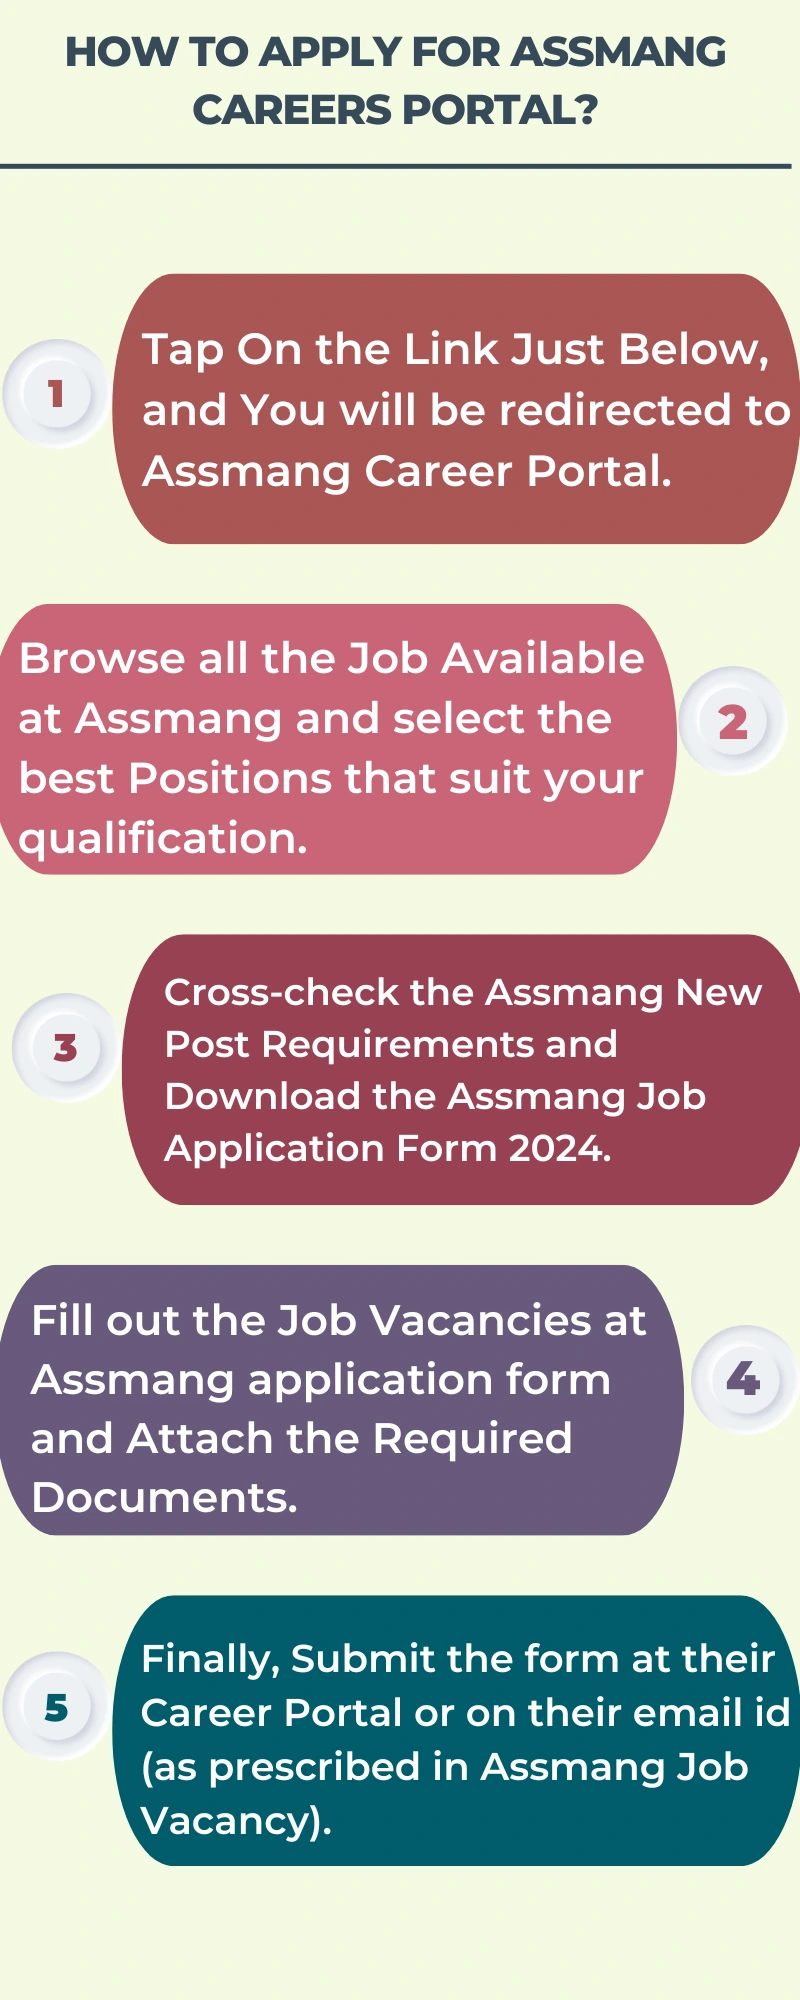 How To Apply for Assmang Careers Portal